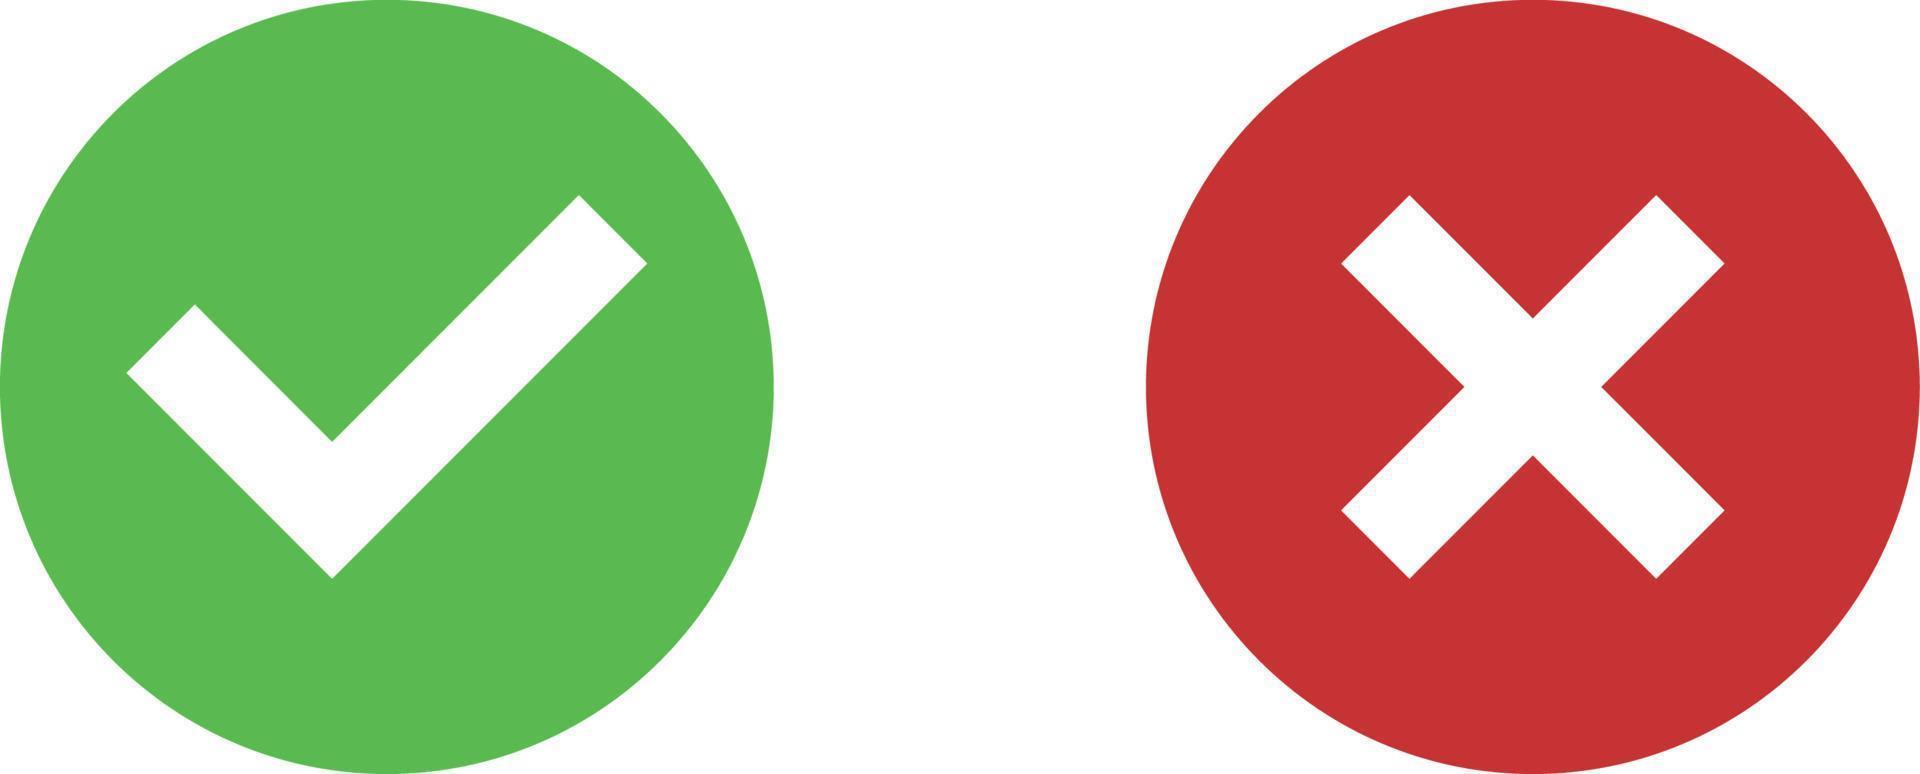 red cross and green check mark vector